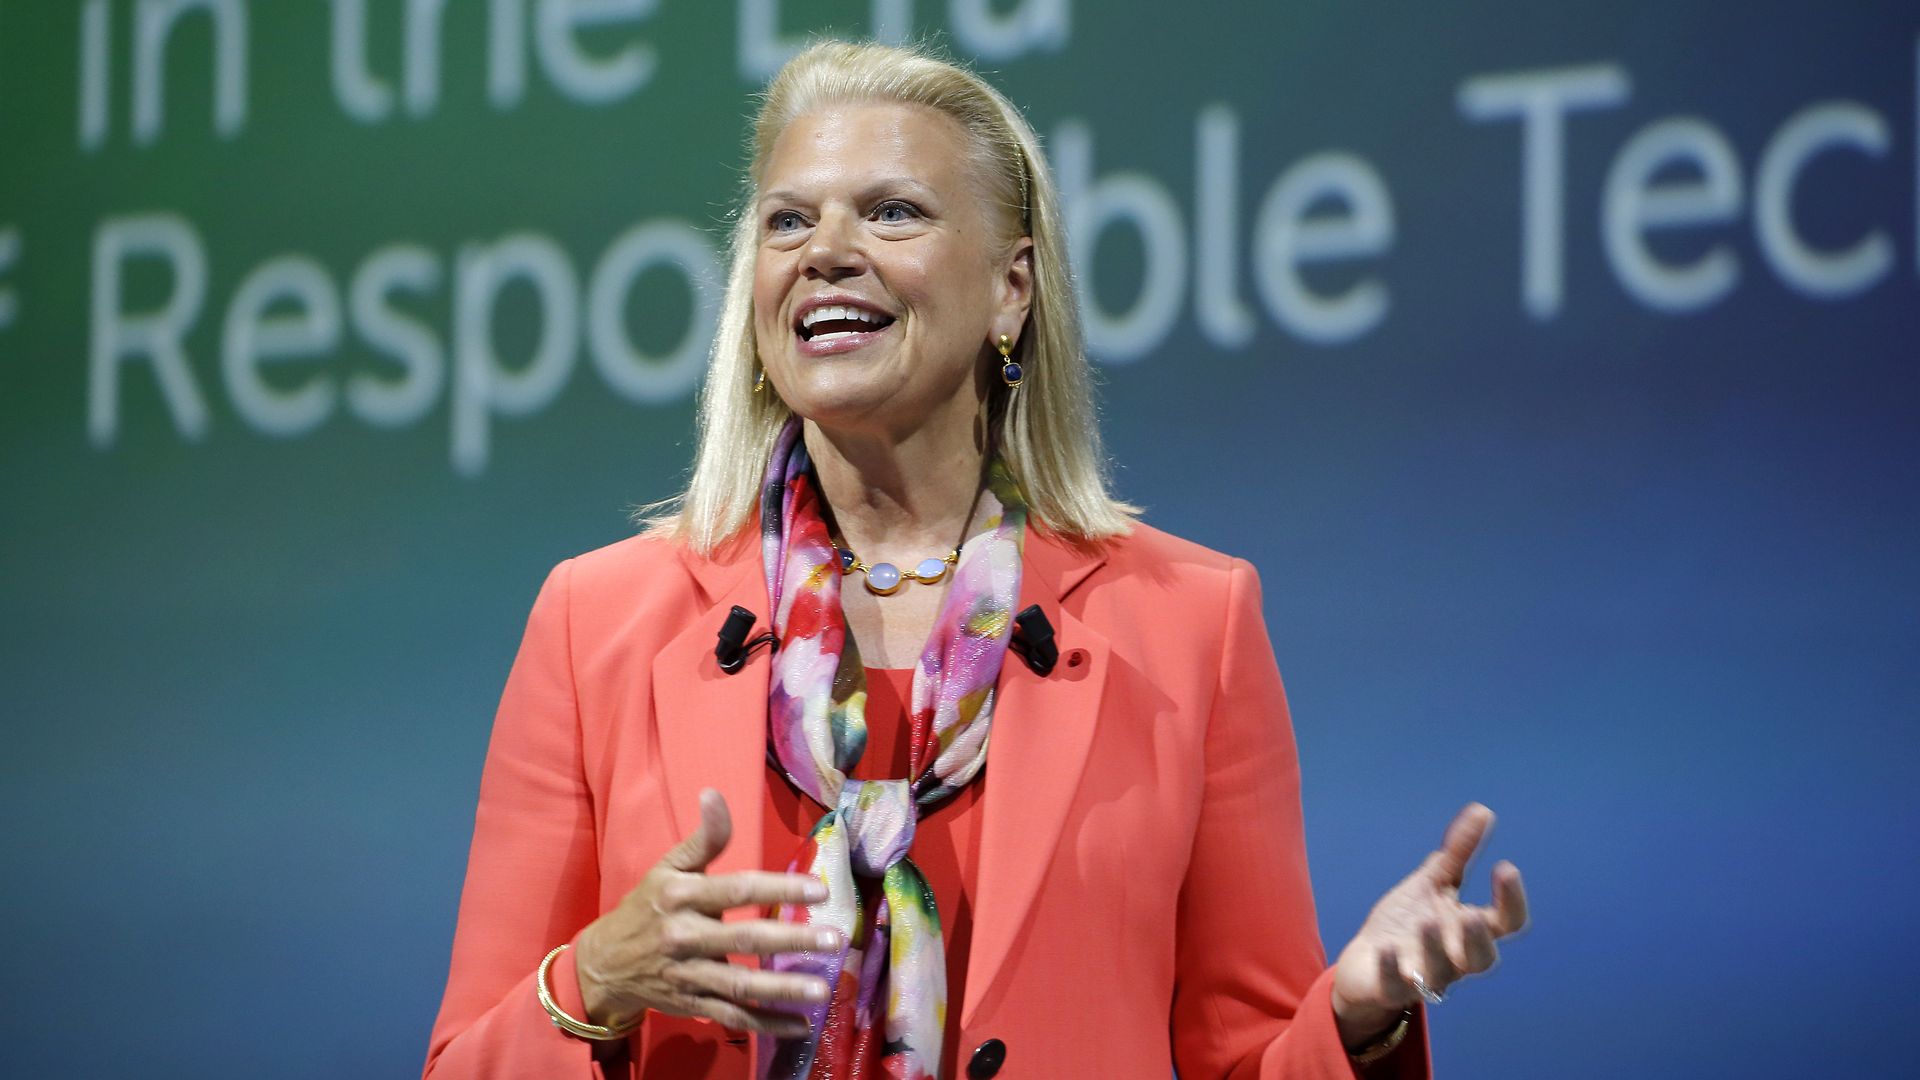 Ginni Rometty is a red jacket presents on stage